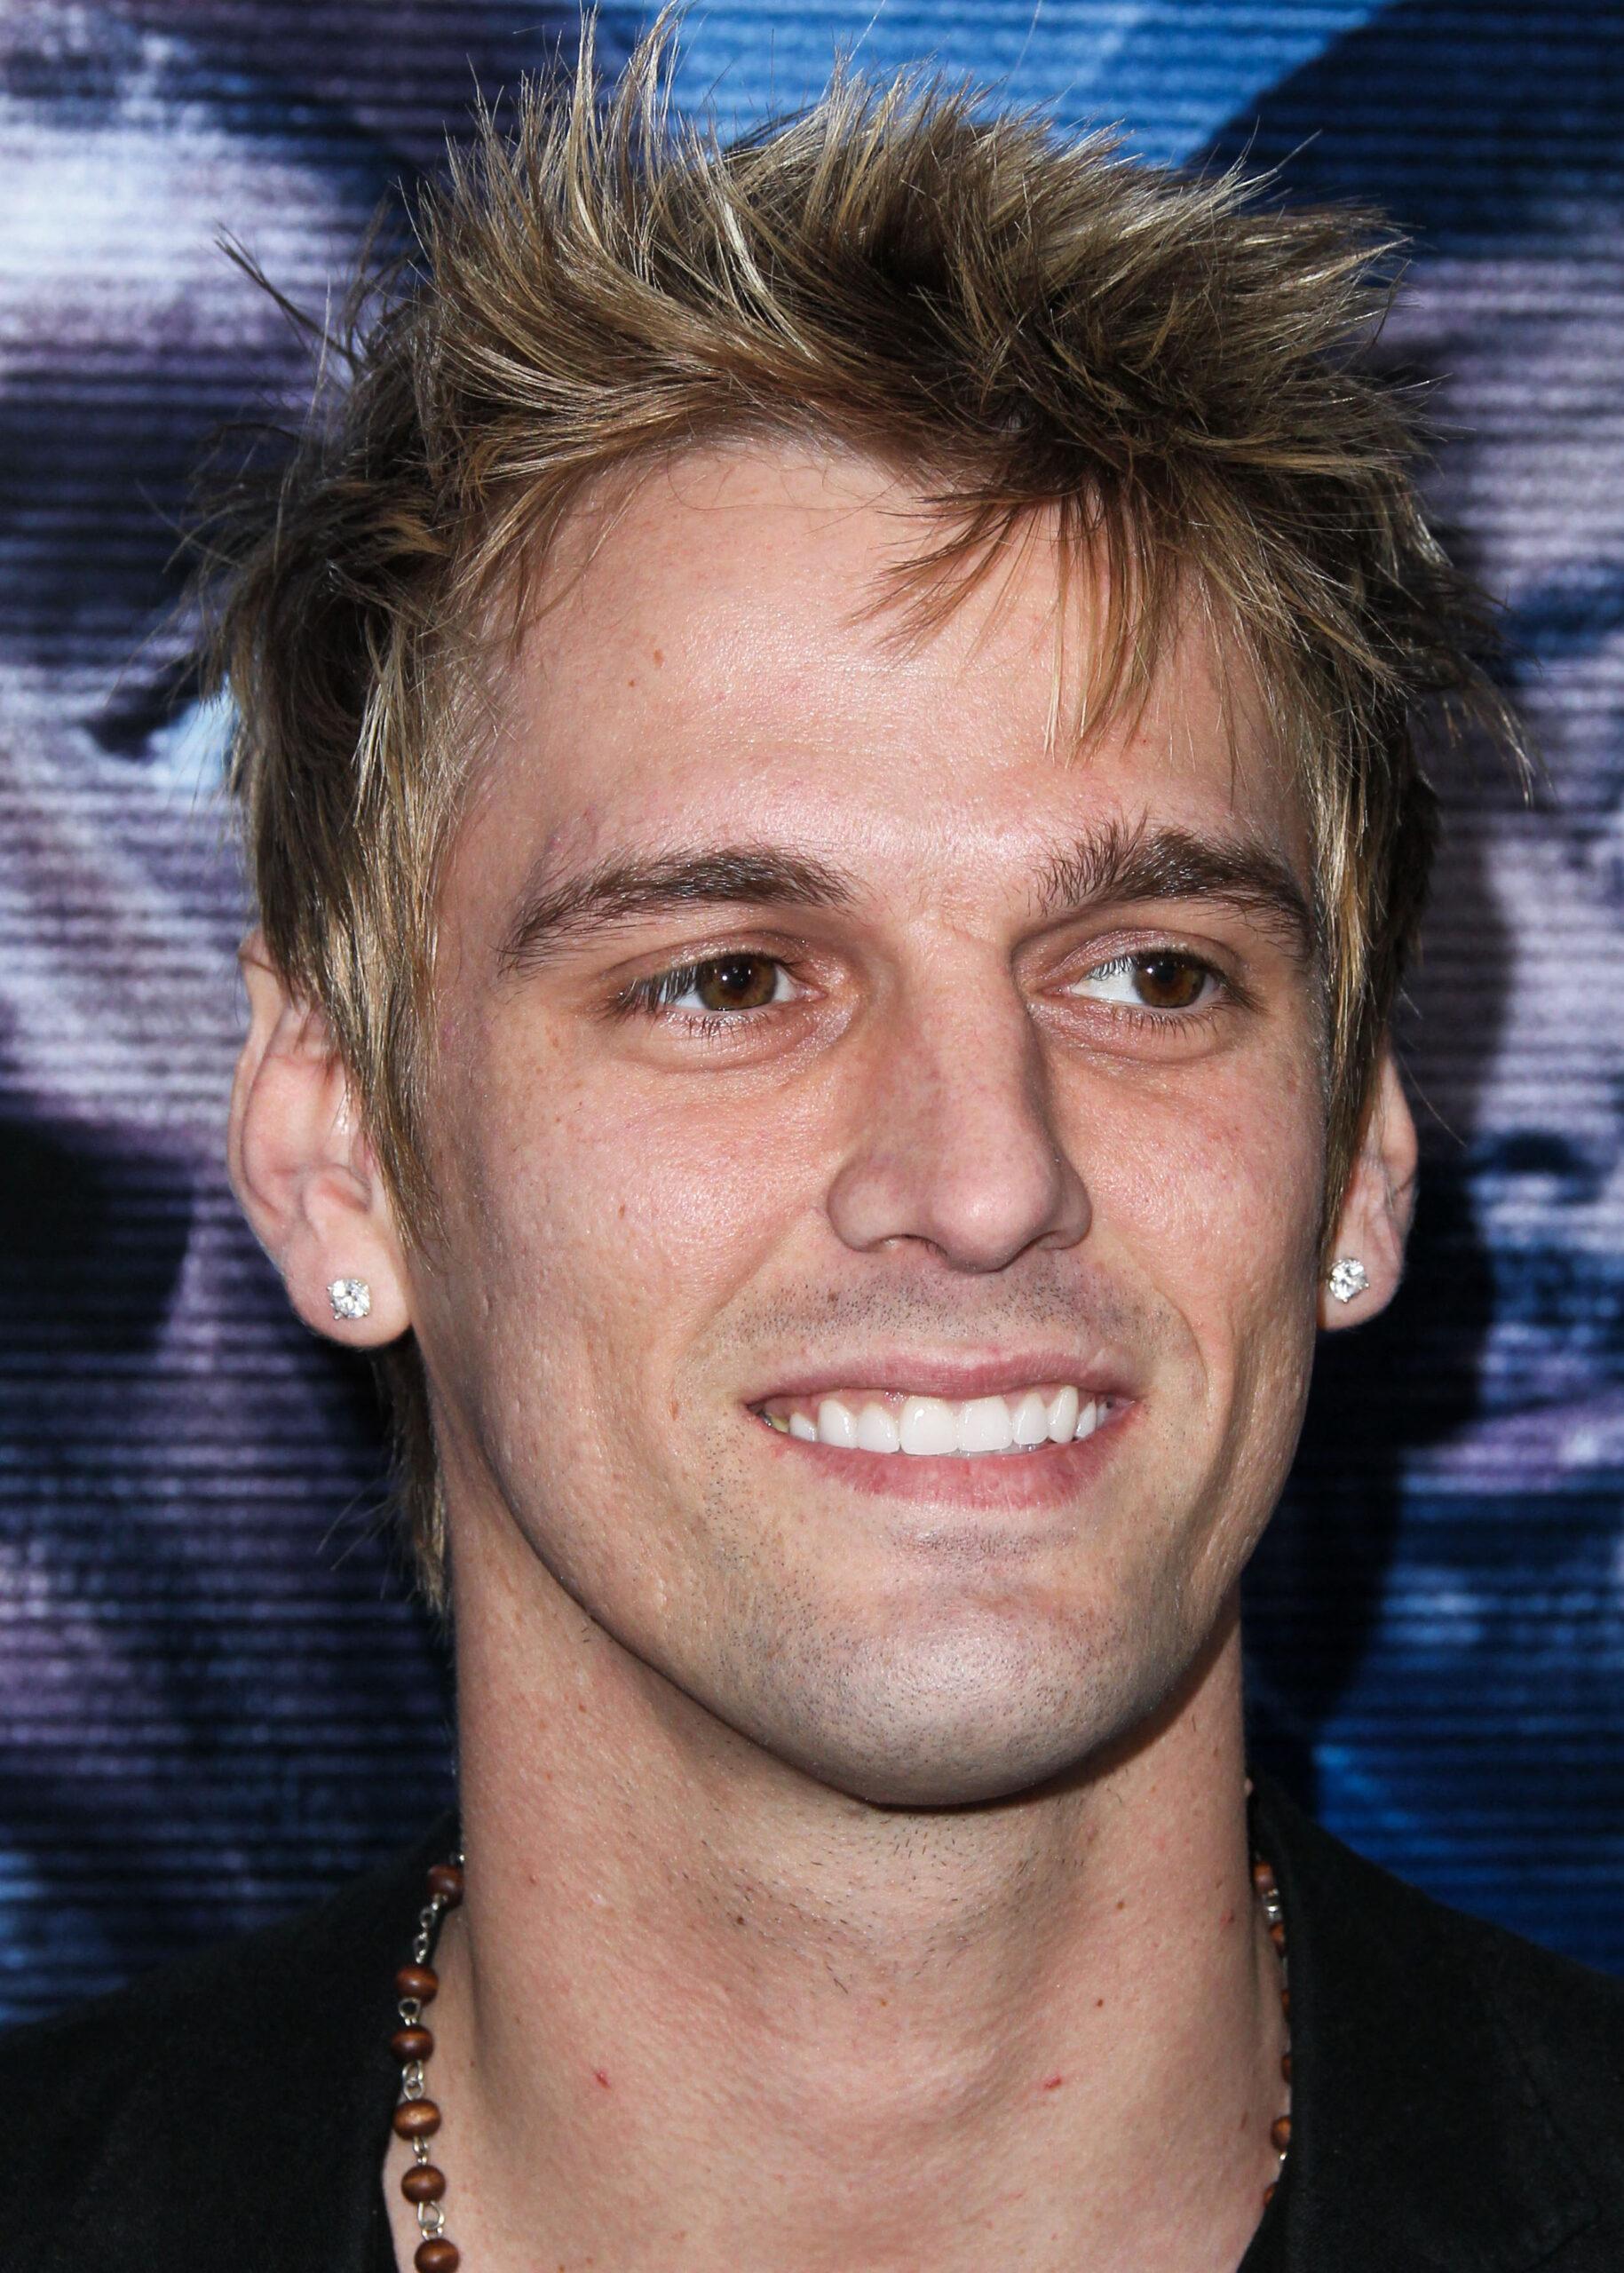 Aaron Carter Official Cause Of Death Is Drowning After Huffing Aerosol Dusters On Xanax